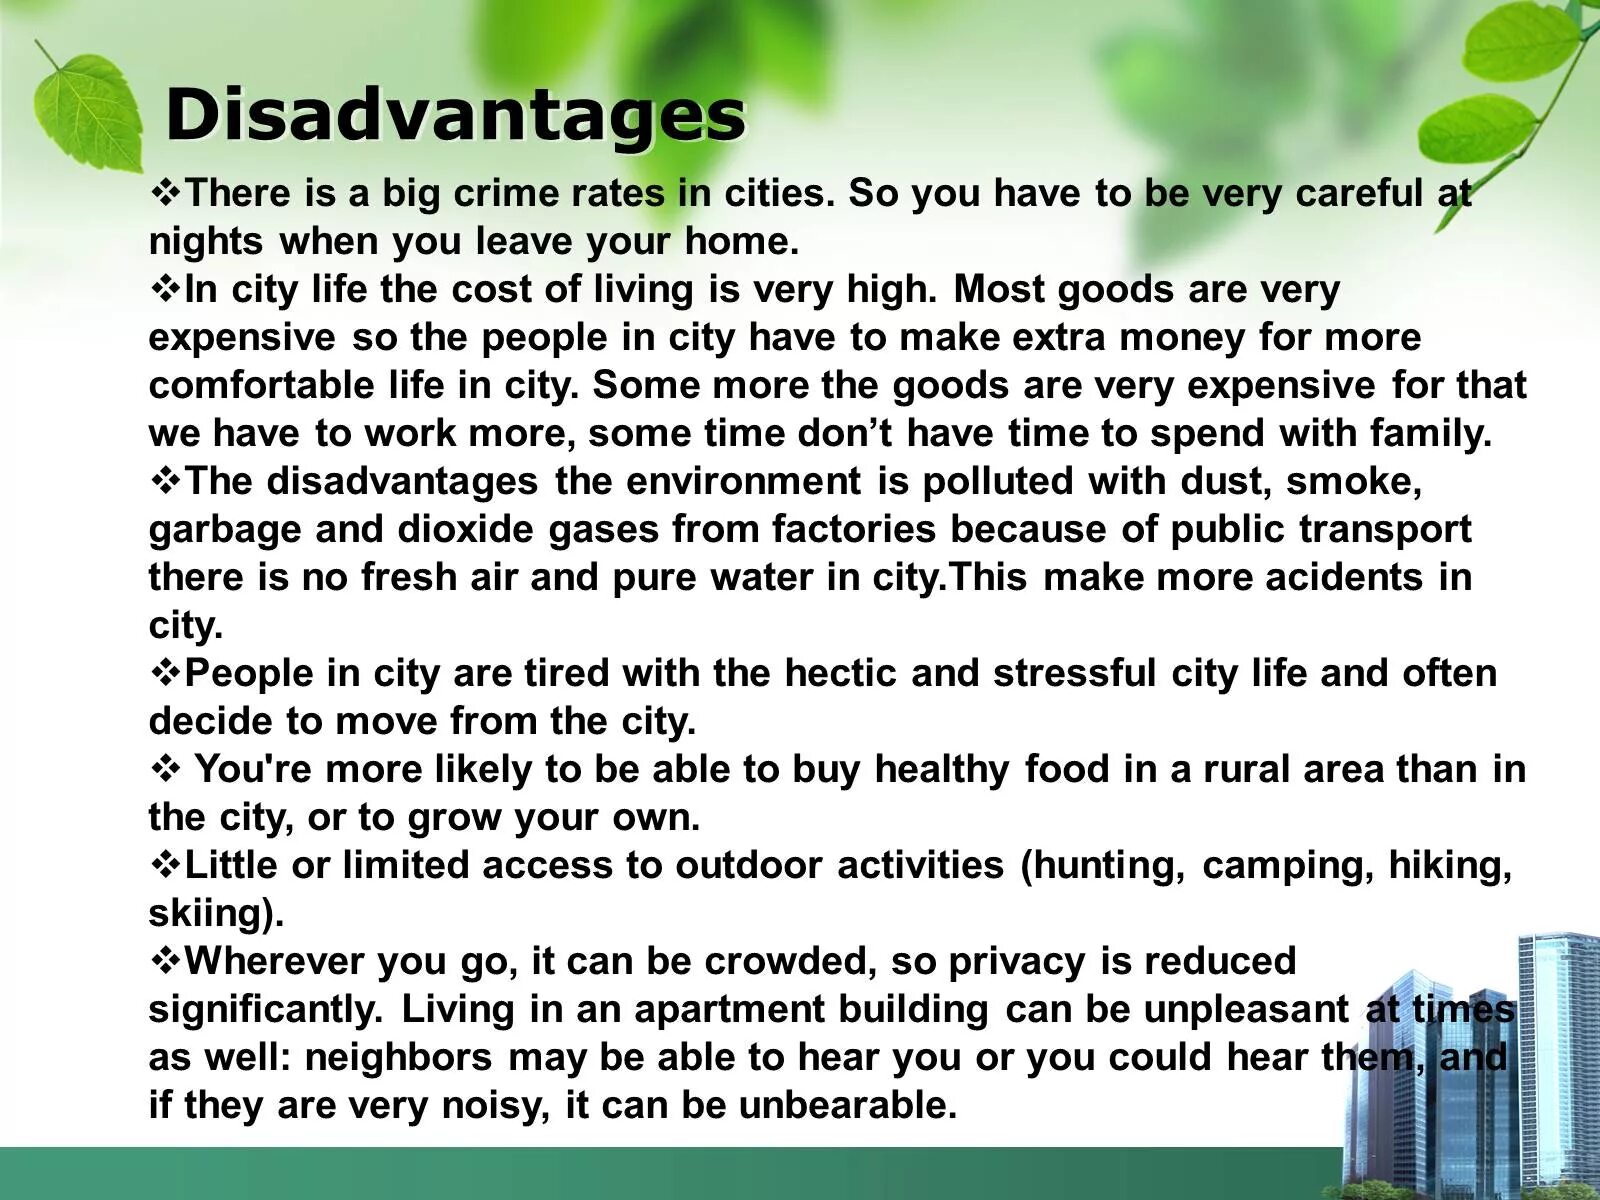 City Life advantages and disadvantages. Темы для эссе по английскому advantages and disadvantages. Темы эссе advantages and disadvantages. Disadvantages of Living in the City. Some people live in the city